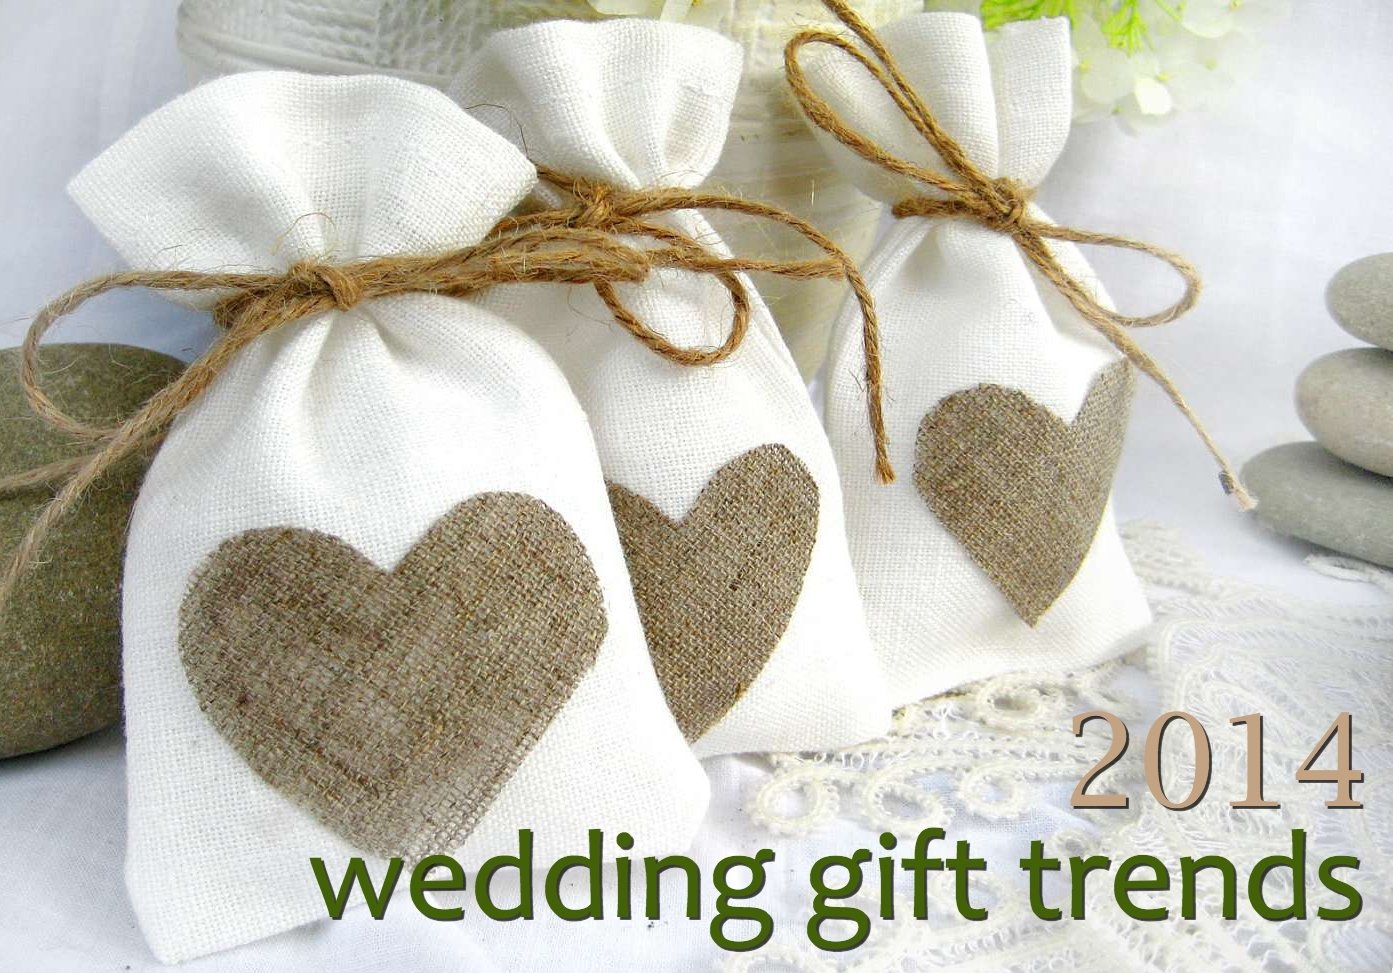 10 Unique Wedding Gift Ideas For Guests wedding gift trends for 2014 the excited bride denver bridal blog 2022